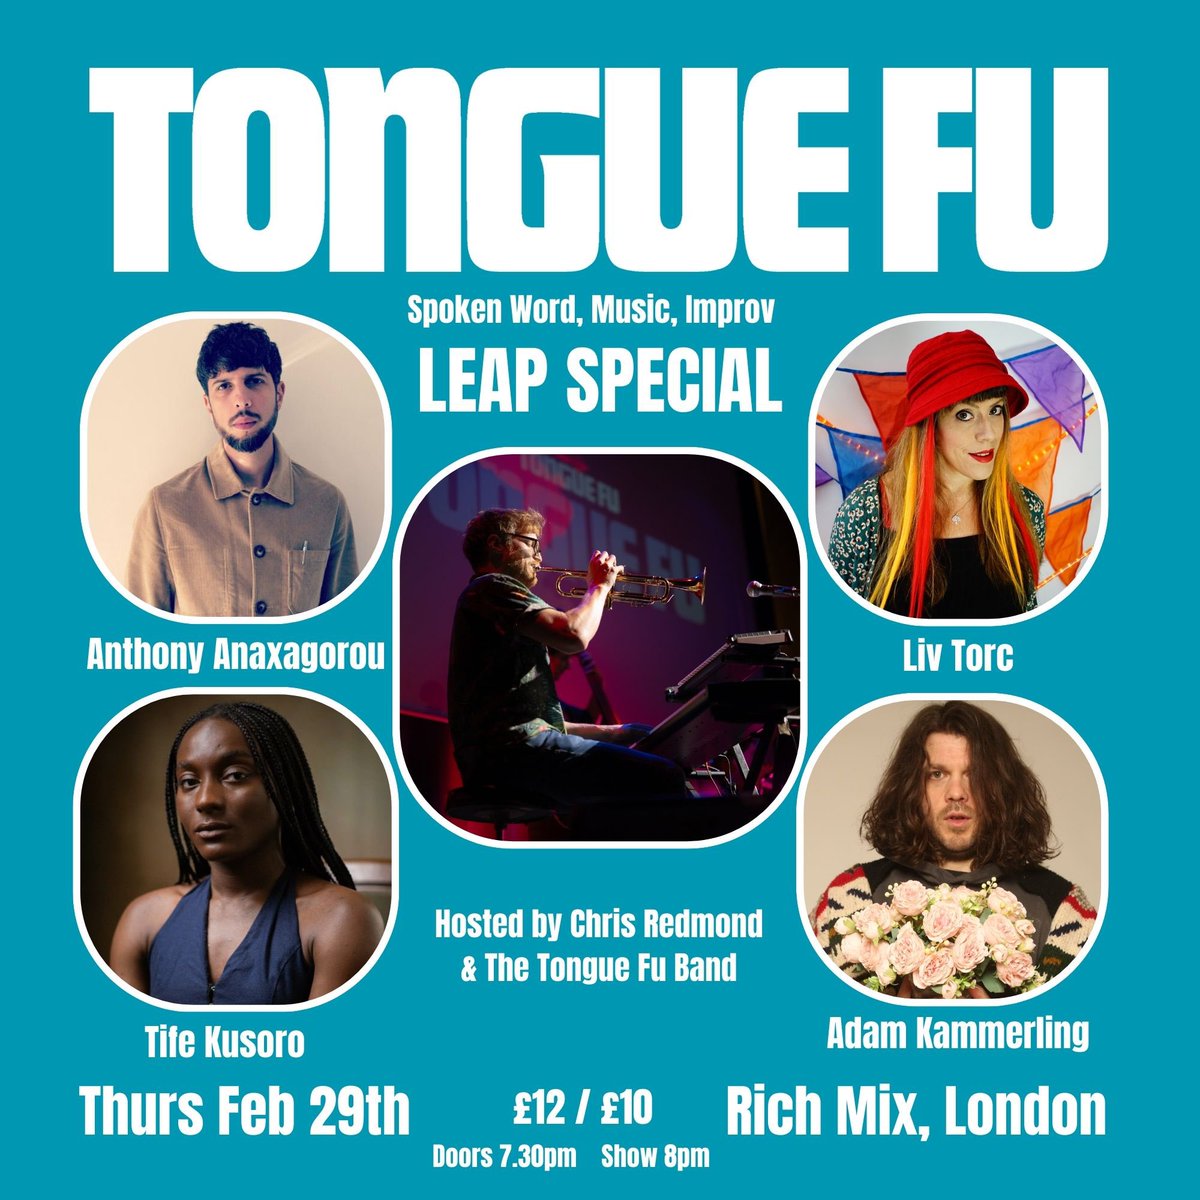 Tonight! Still some tickets left if you’re thinking about it. Come through! @RichMixLondon